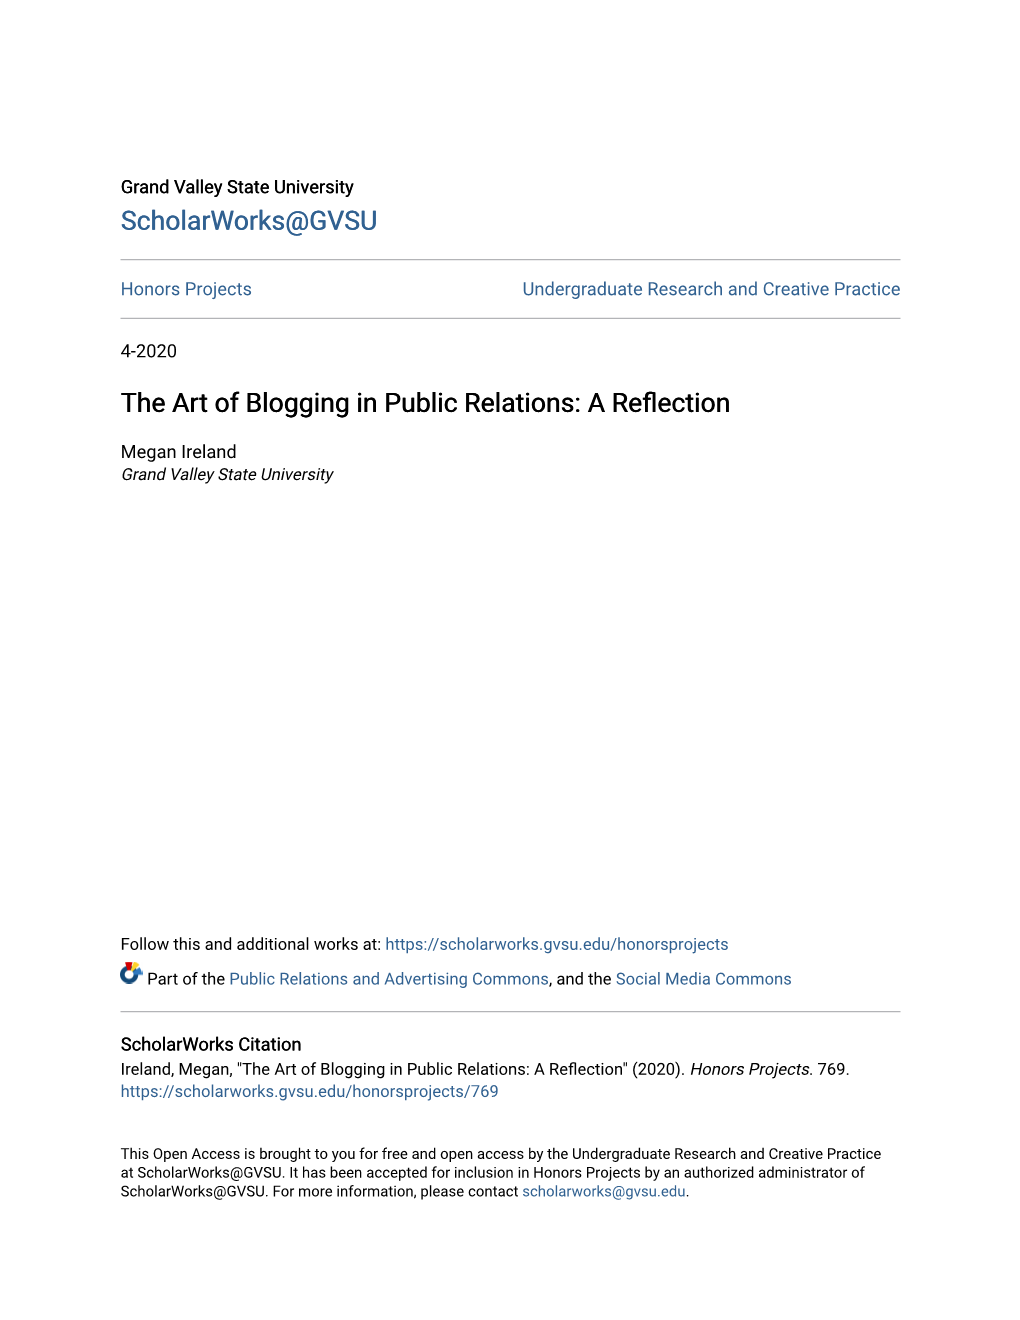 The Art of Blogging in Public Relations: a Reflection